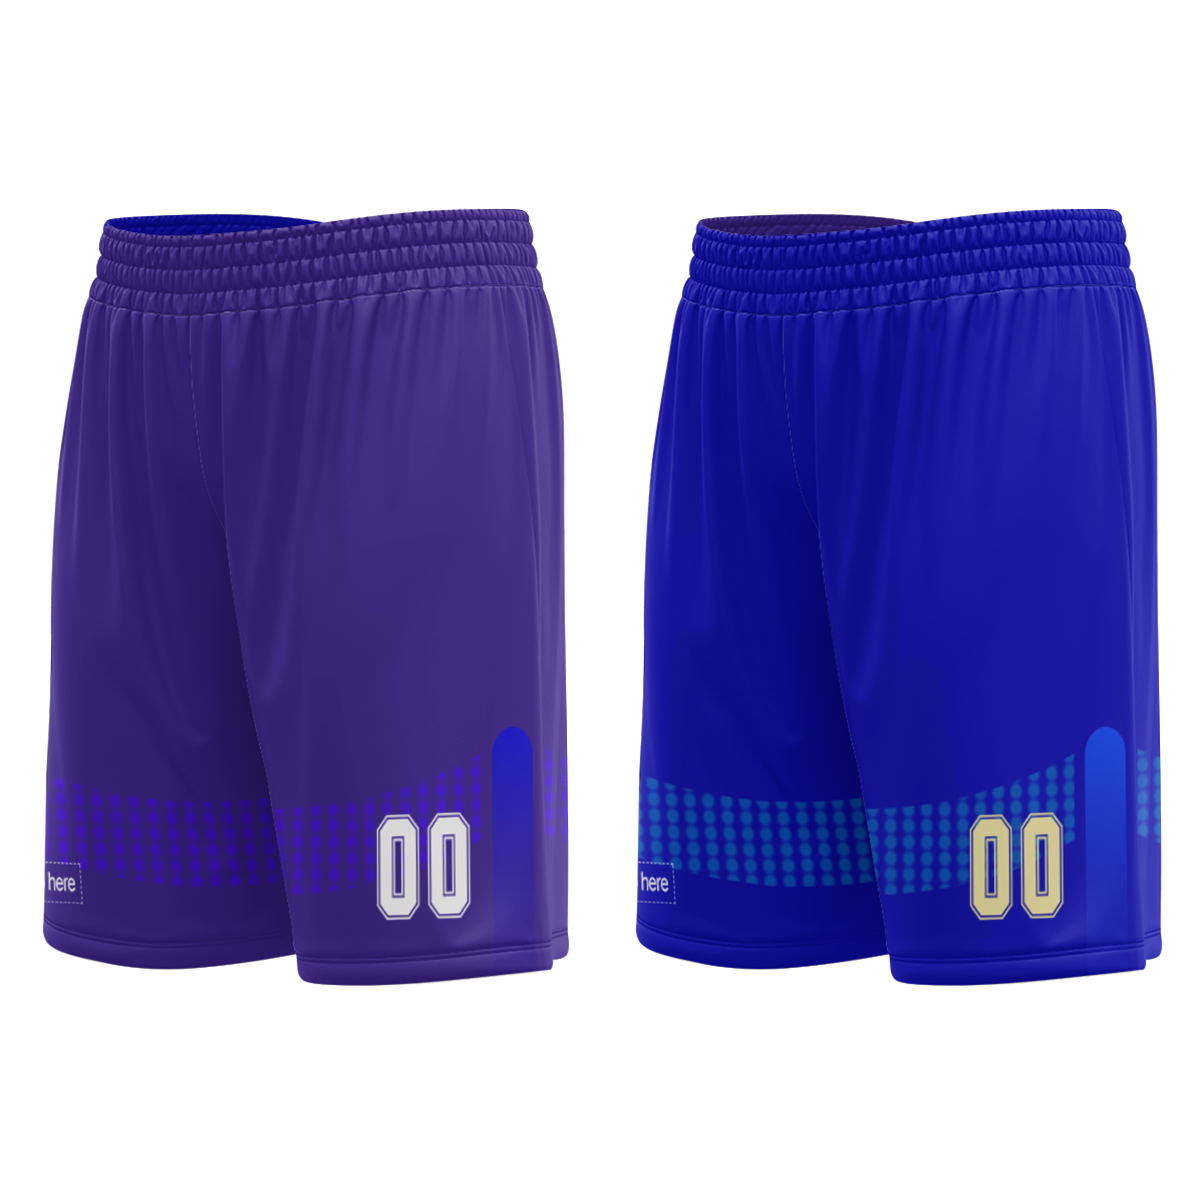 newest-customize-printed-basketball-jersey-design-color-sublimated-basketball-uniforms-set-at-cj-pod-8